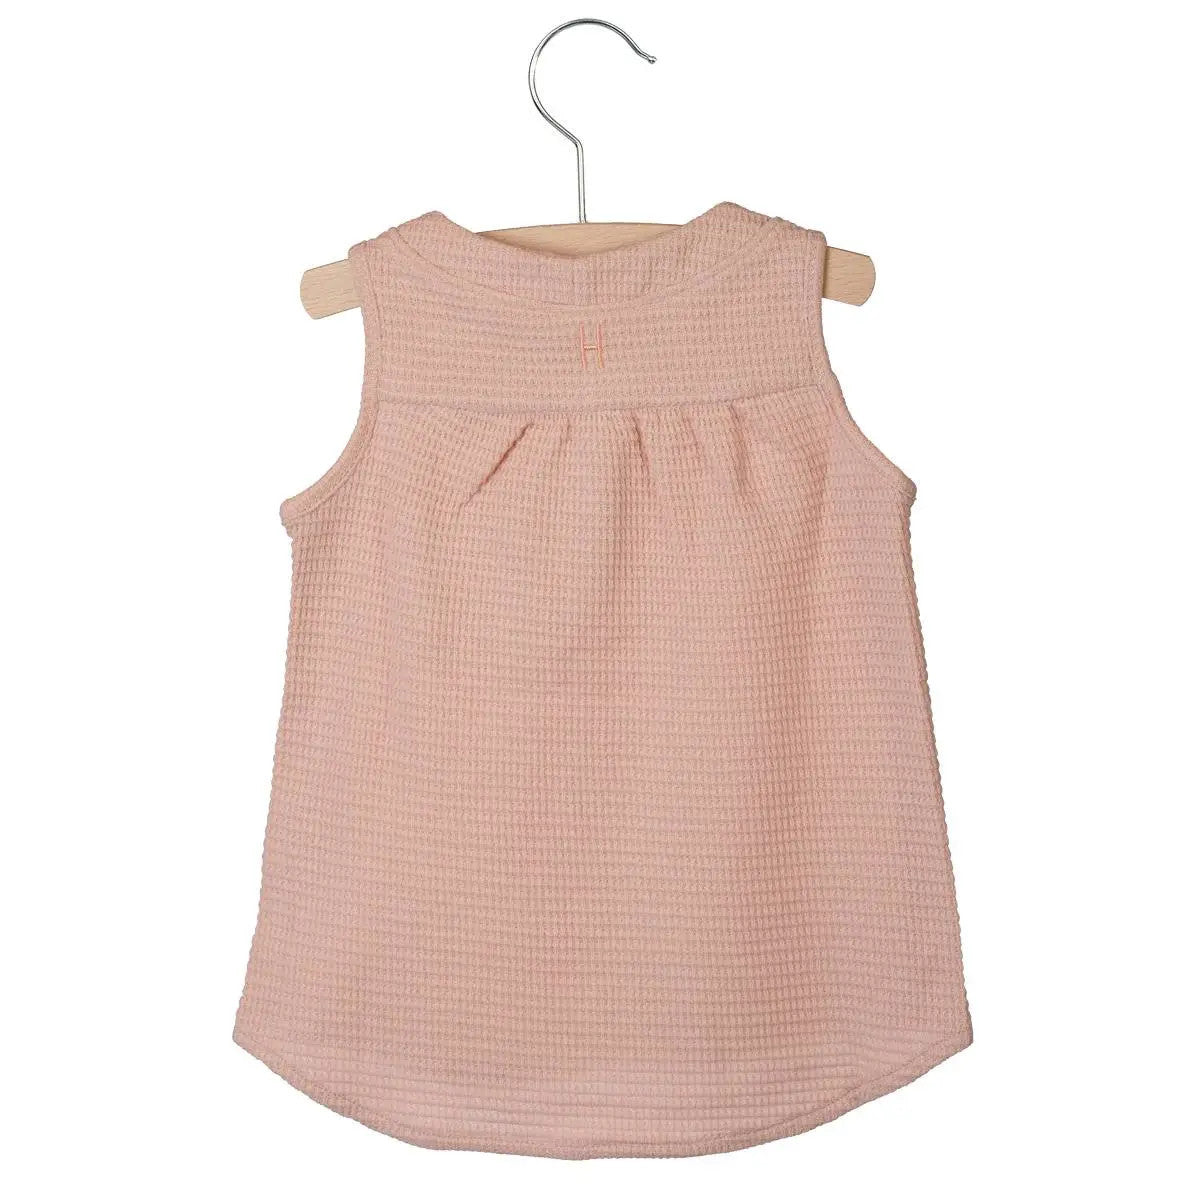 Little Hedonist old rose sleeveless top in an organic, soft, and breathable cotton